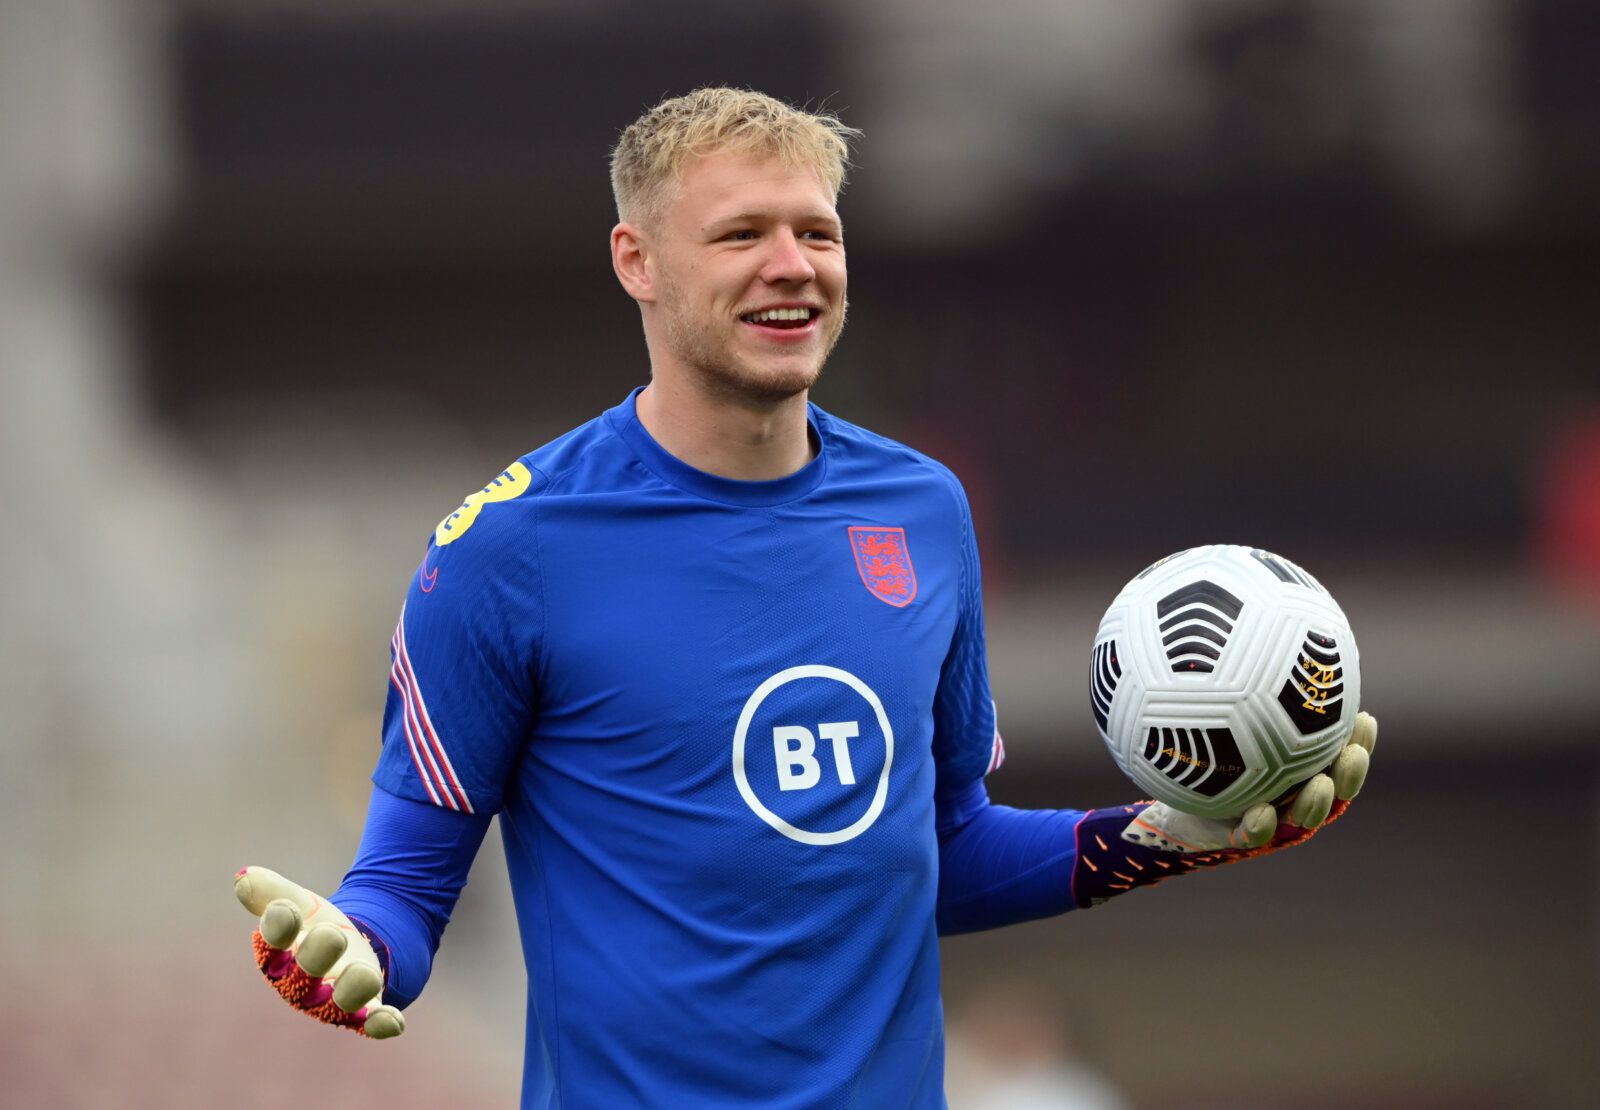 Soccer Football - International Friendly - England v Austria - Riverside Stadium, Middlesbrough, Britain - June 2, 2021 England's Aaron Ramsdale during the warm up before the match Pool via REUTERS/Stu Forster